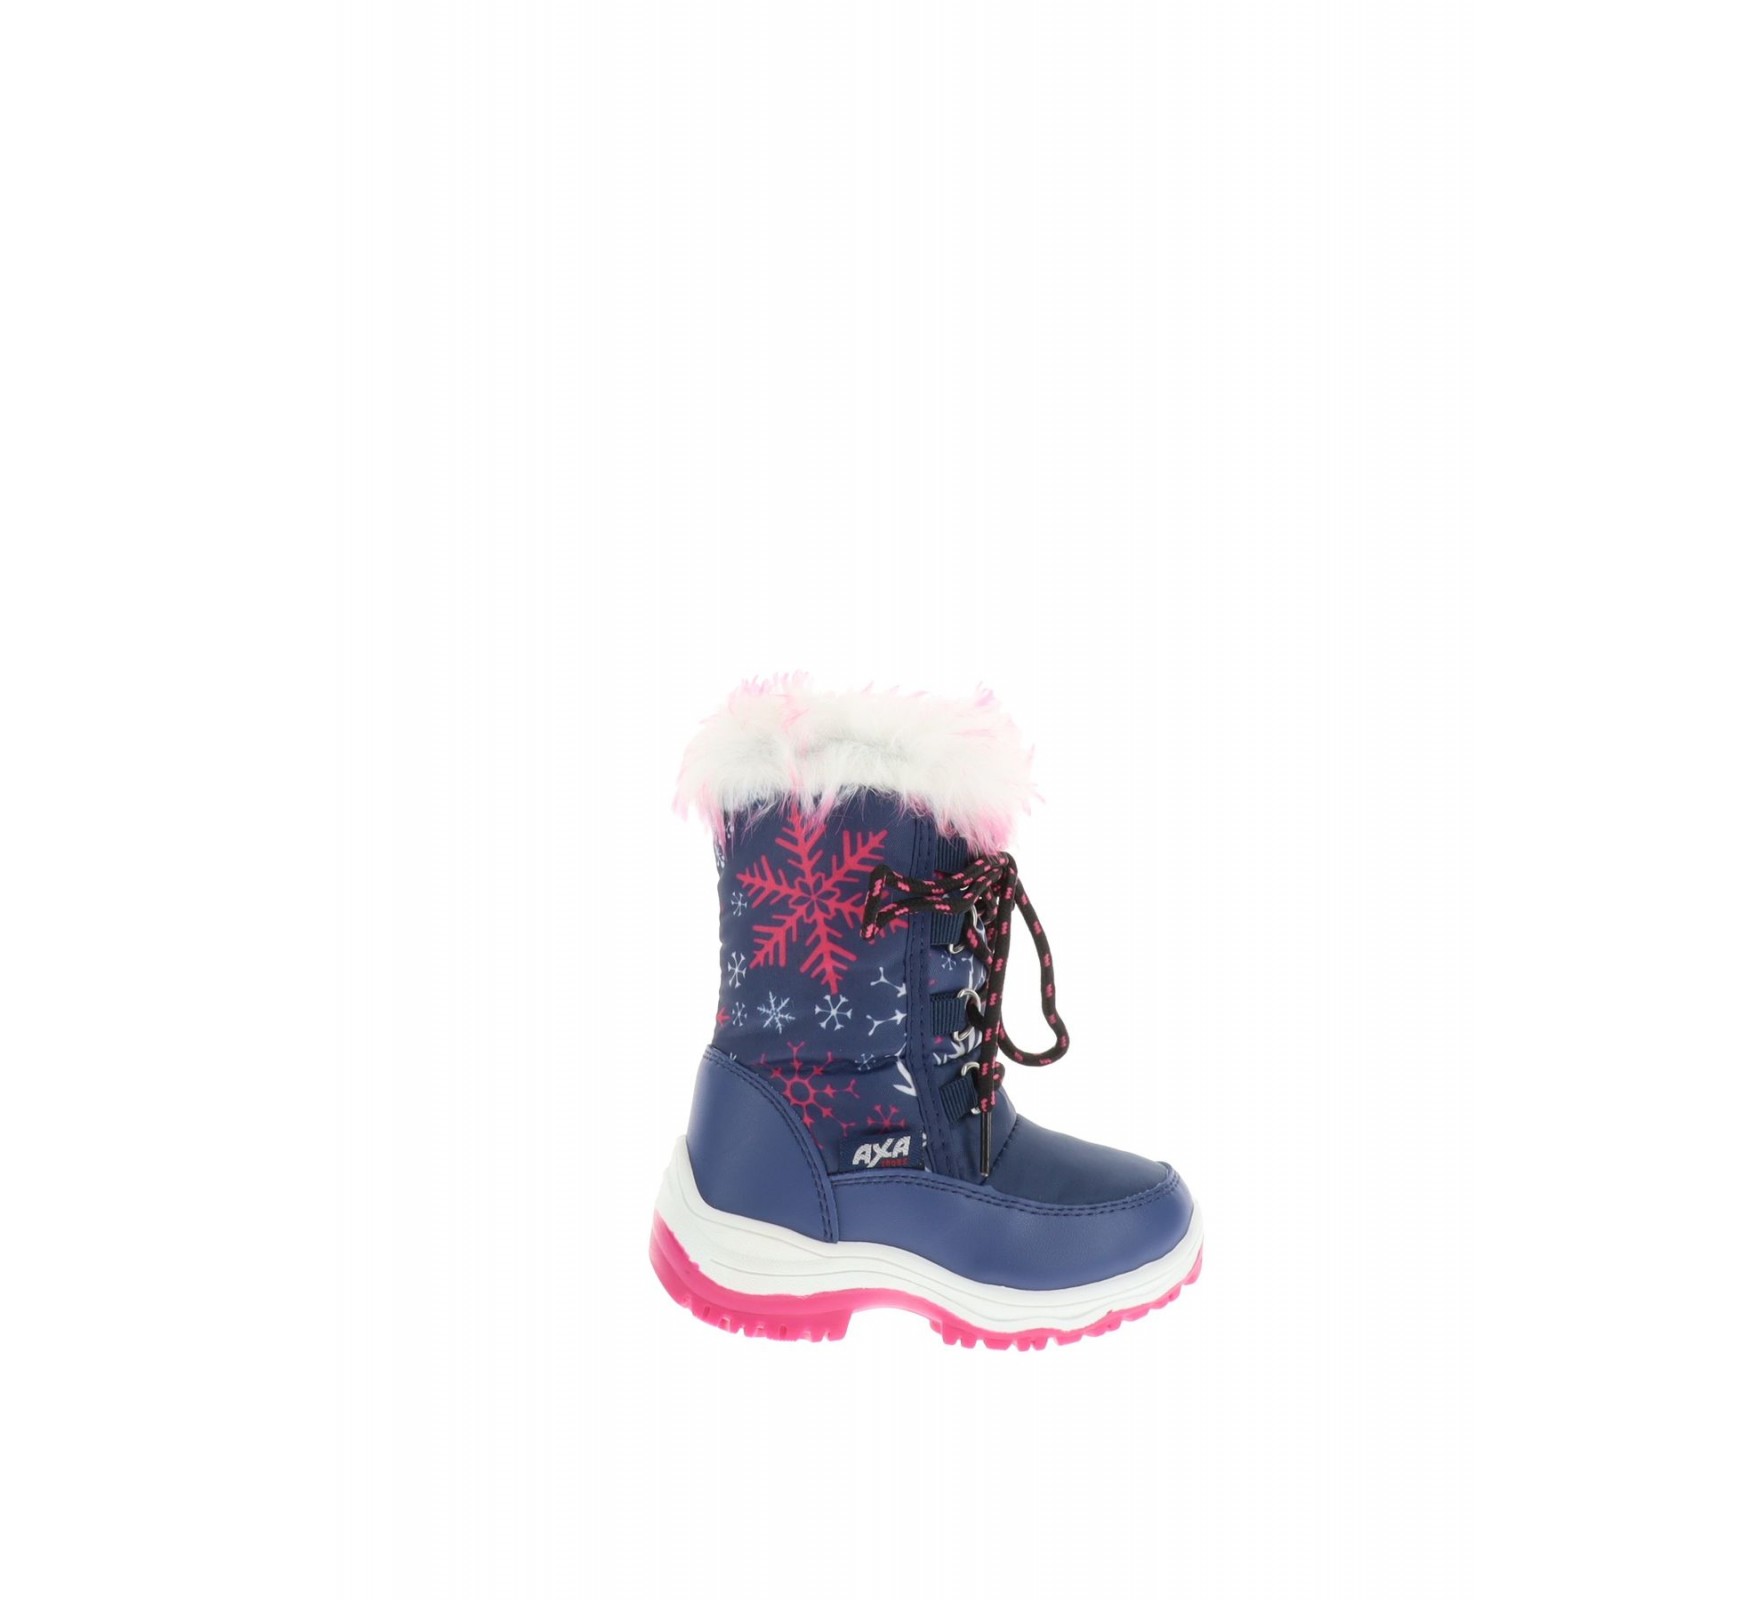 Axa - Children's Snow Boots in Fabric-Snow boots-LaScarpaShop